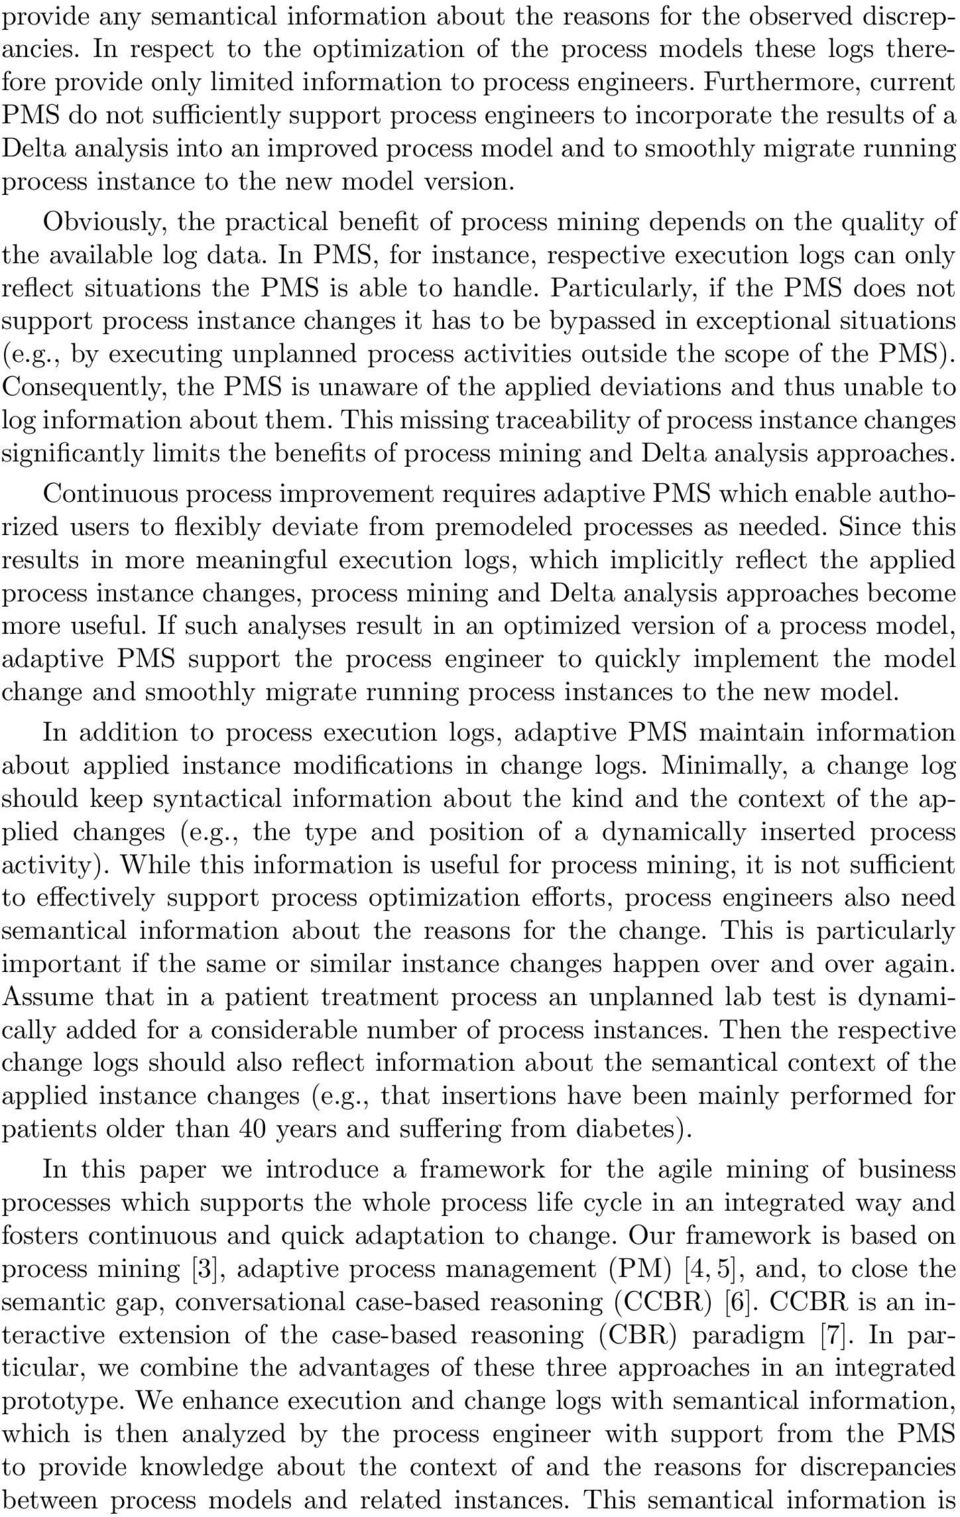 Furthermore, current PMS do not sufficiently support process engineers to incorporate the results of a Delta analysis into an improved process model and to smoothly migrate running process instance